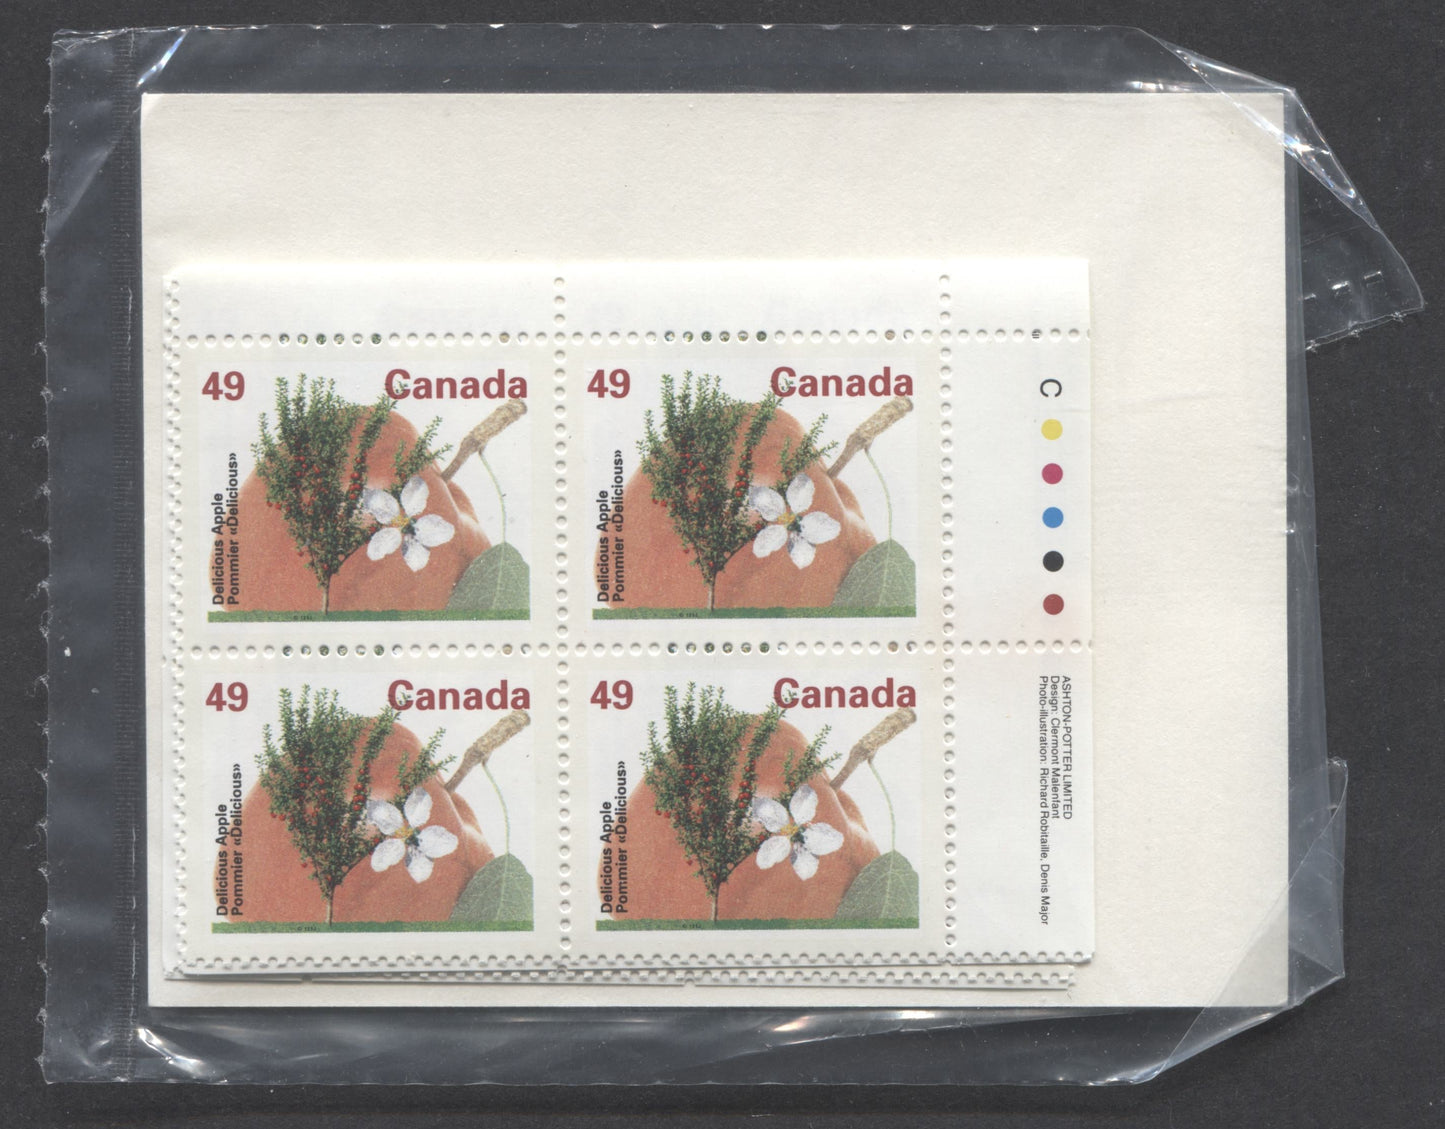 Lot 46 Canada #1364 49c Multicoloured 1992 Fruit Tree Definitive Issue, Canada Post Sealed Pack of Inscription Blocks, Ashton Potter Printing On NF/DF CPP Paper, With DF Type 6A Insert Card, VFNH, Unitrade Cat. $25